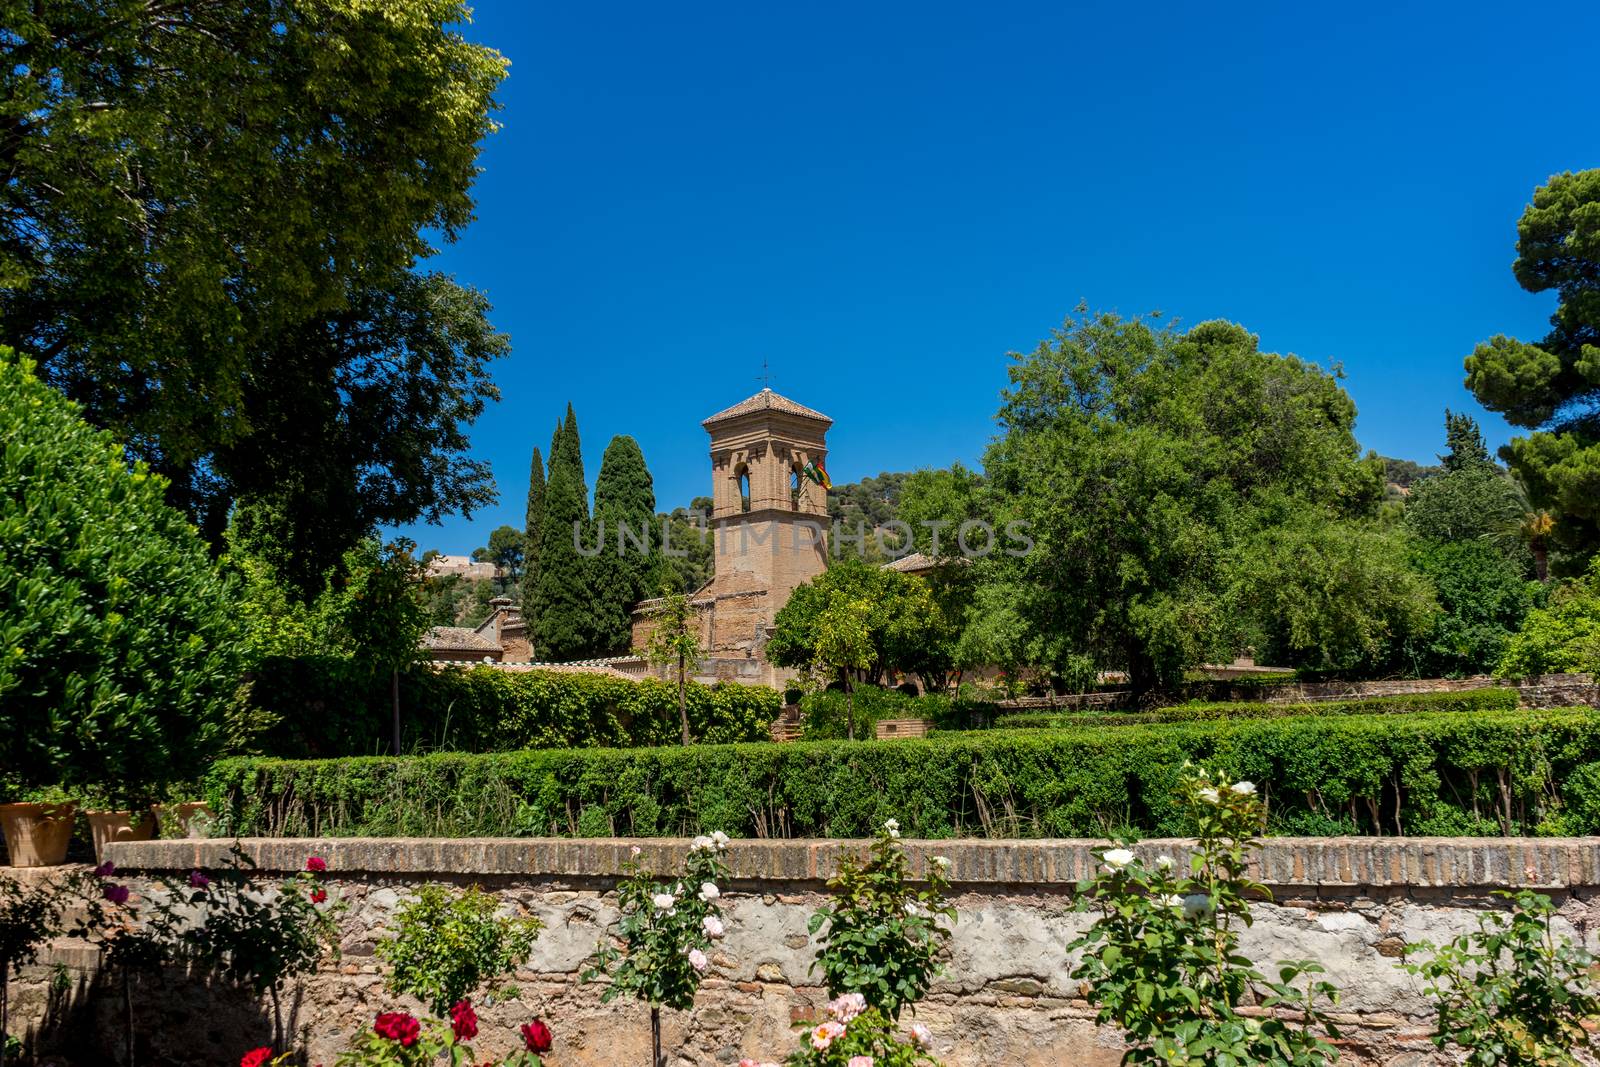 Church in the gardens of Alhambra in Granada, Spain, Europe on a bright sunny day with clear blue sky